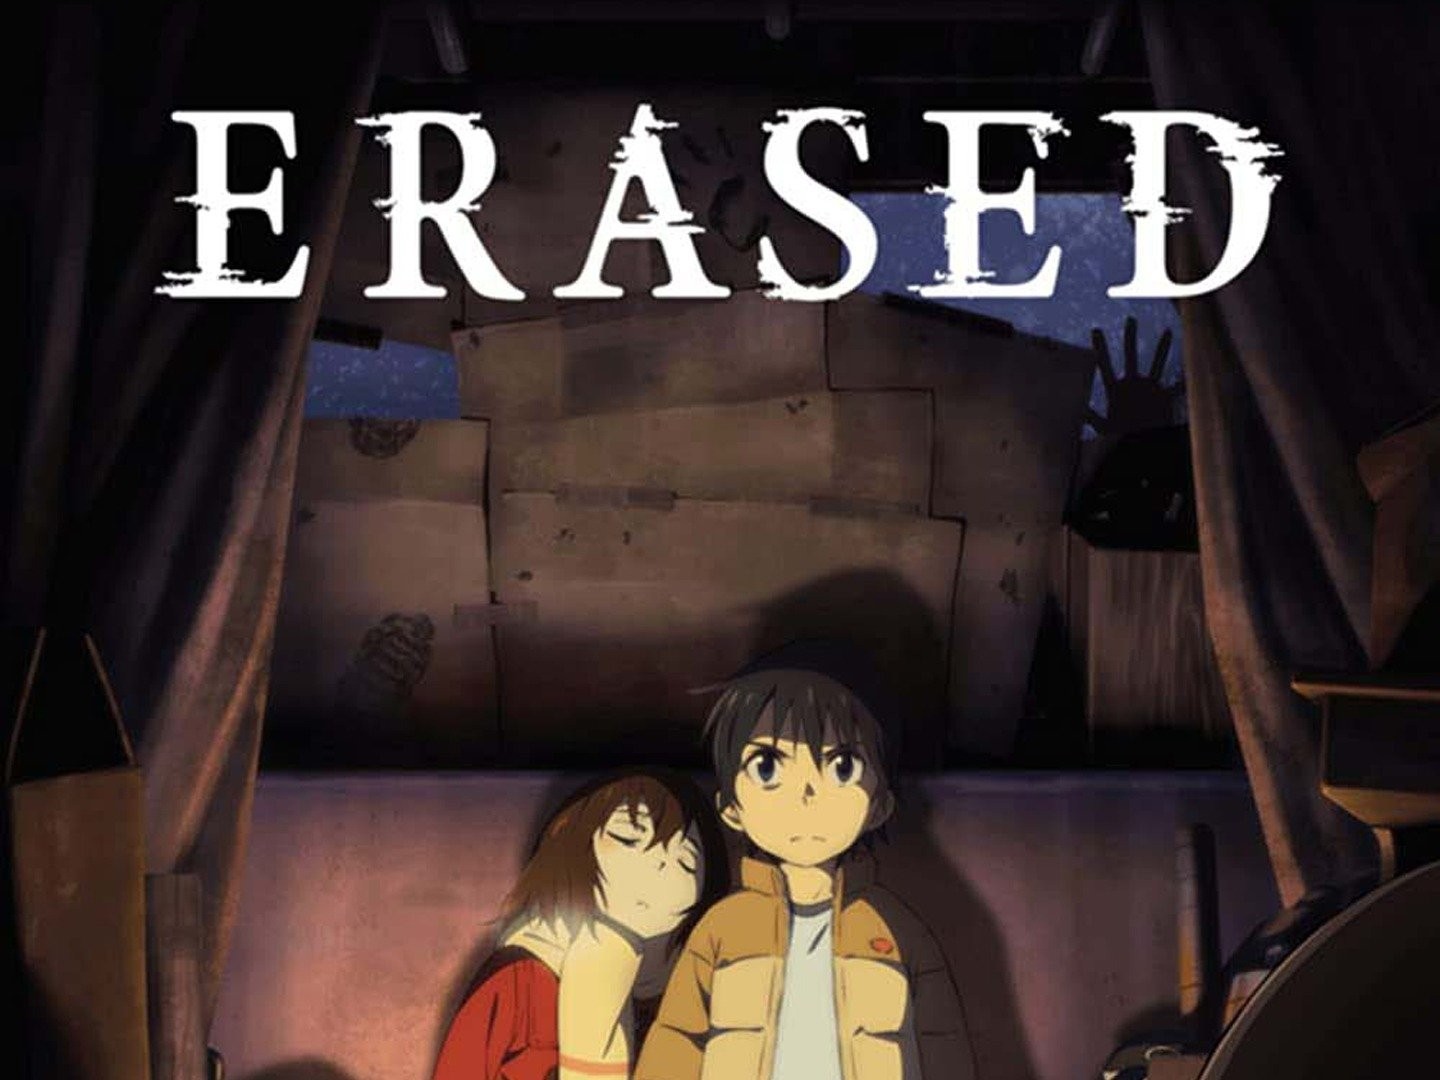 What animes are similar to the anime 'Erased'? - Quora